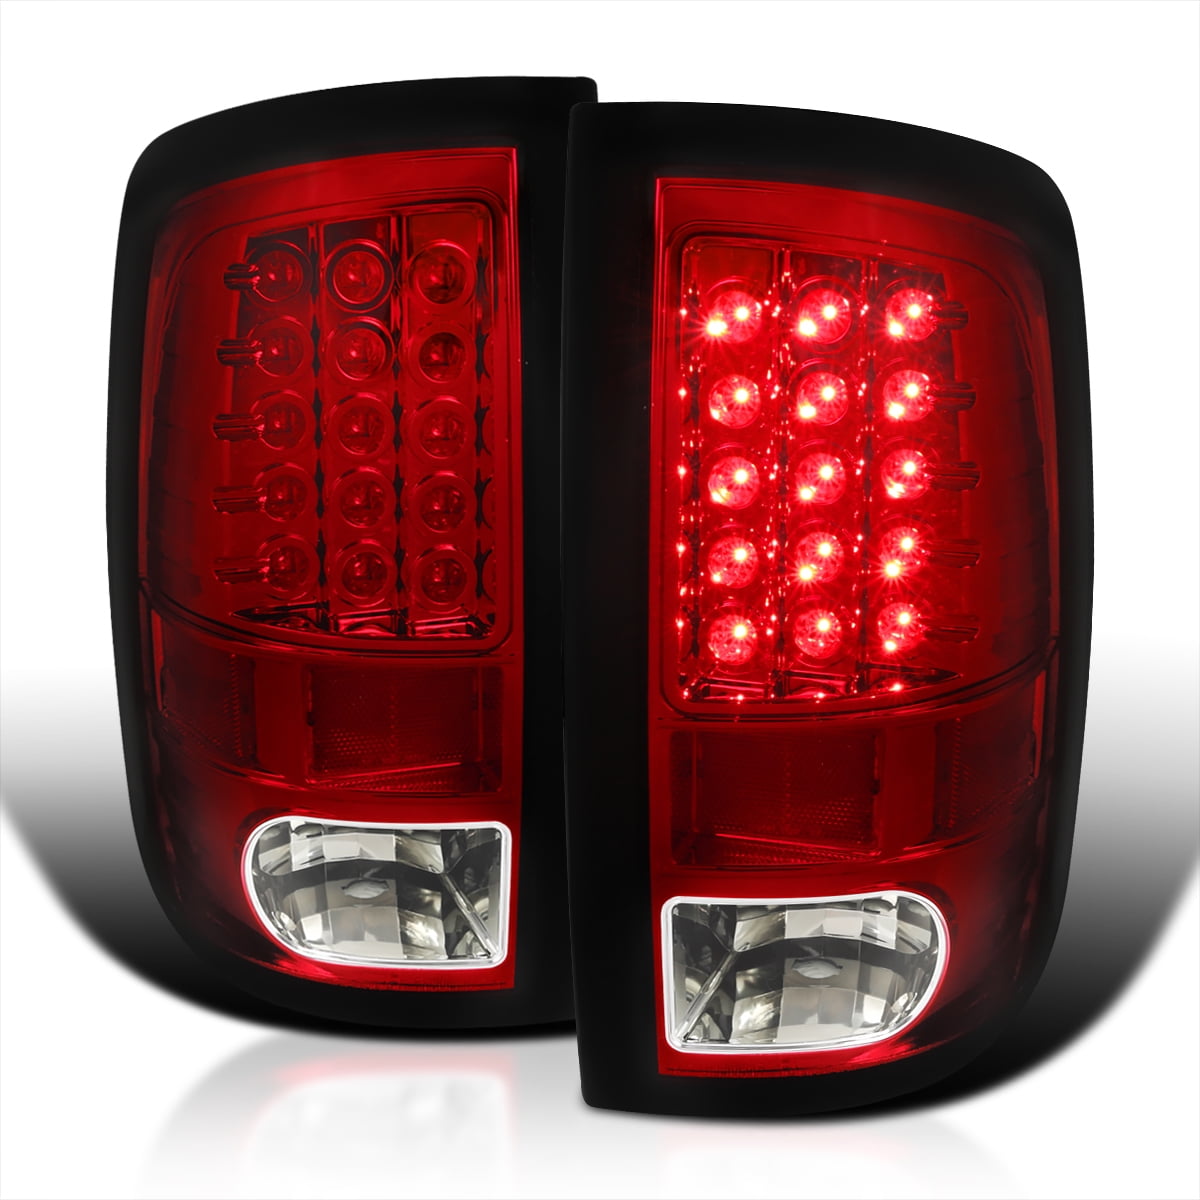 For Red Clear 2009-2018 Dodge Ram 1500 10-18 Ram 2500 3500 Pickup Truck LED Tail Lights Pair Left+Right Side 